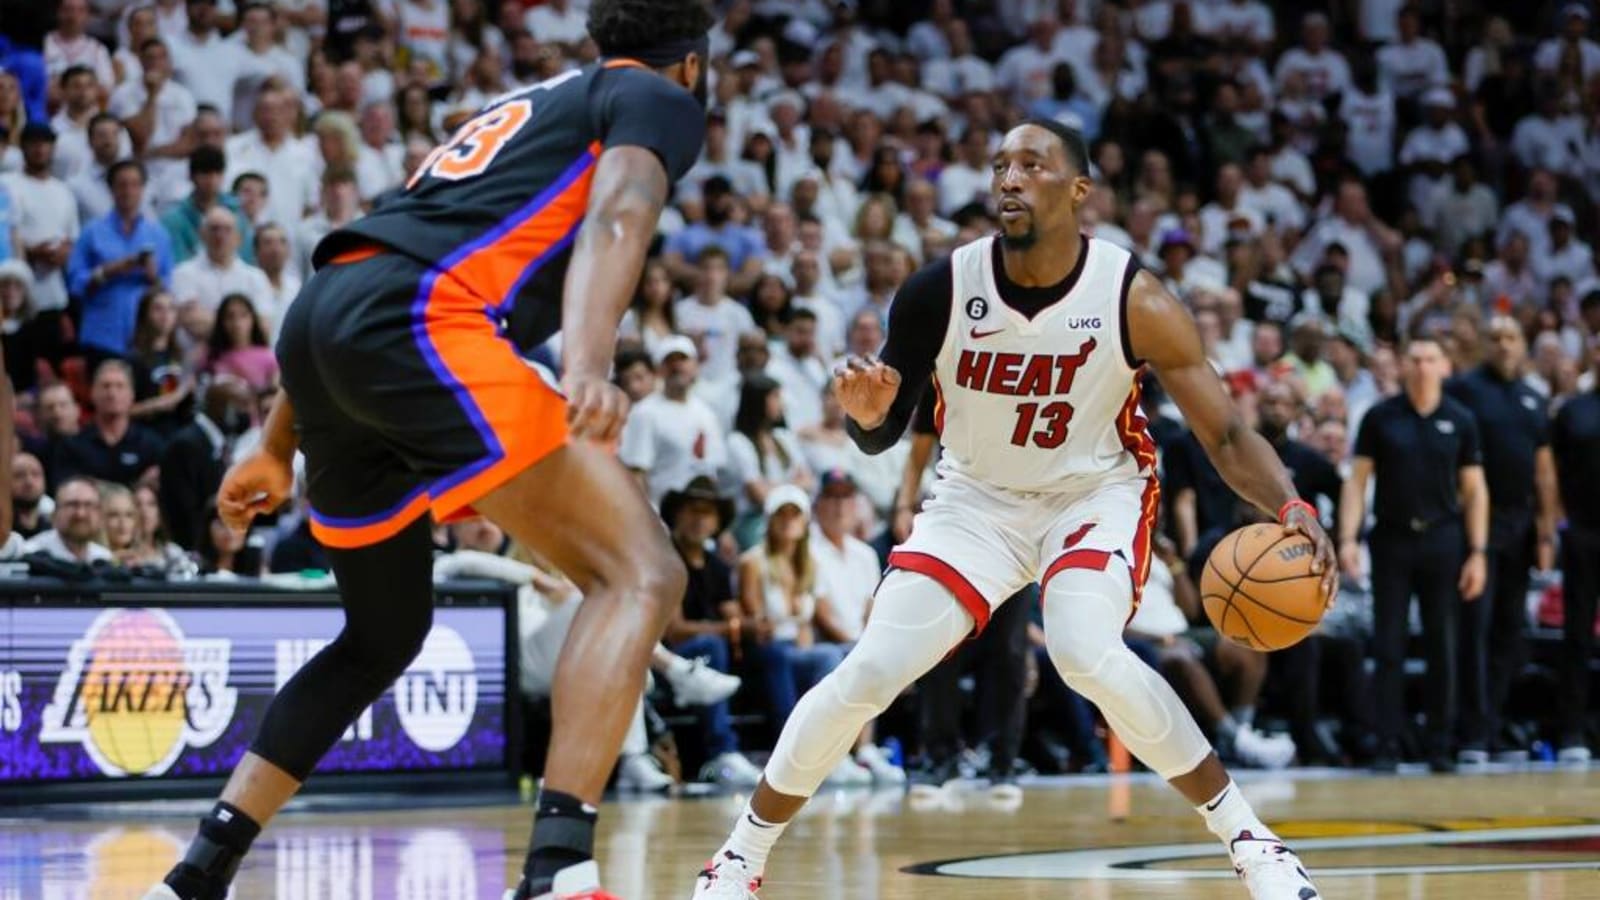 Watch New York Knicks vs. Miami Heat in Game 5 of the NBA Playoffs